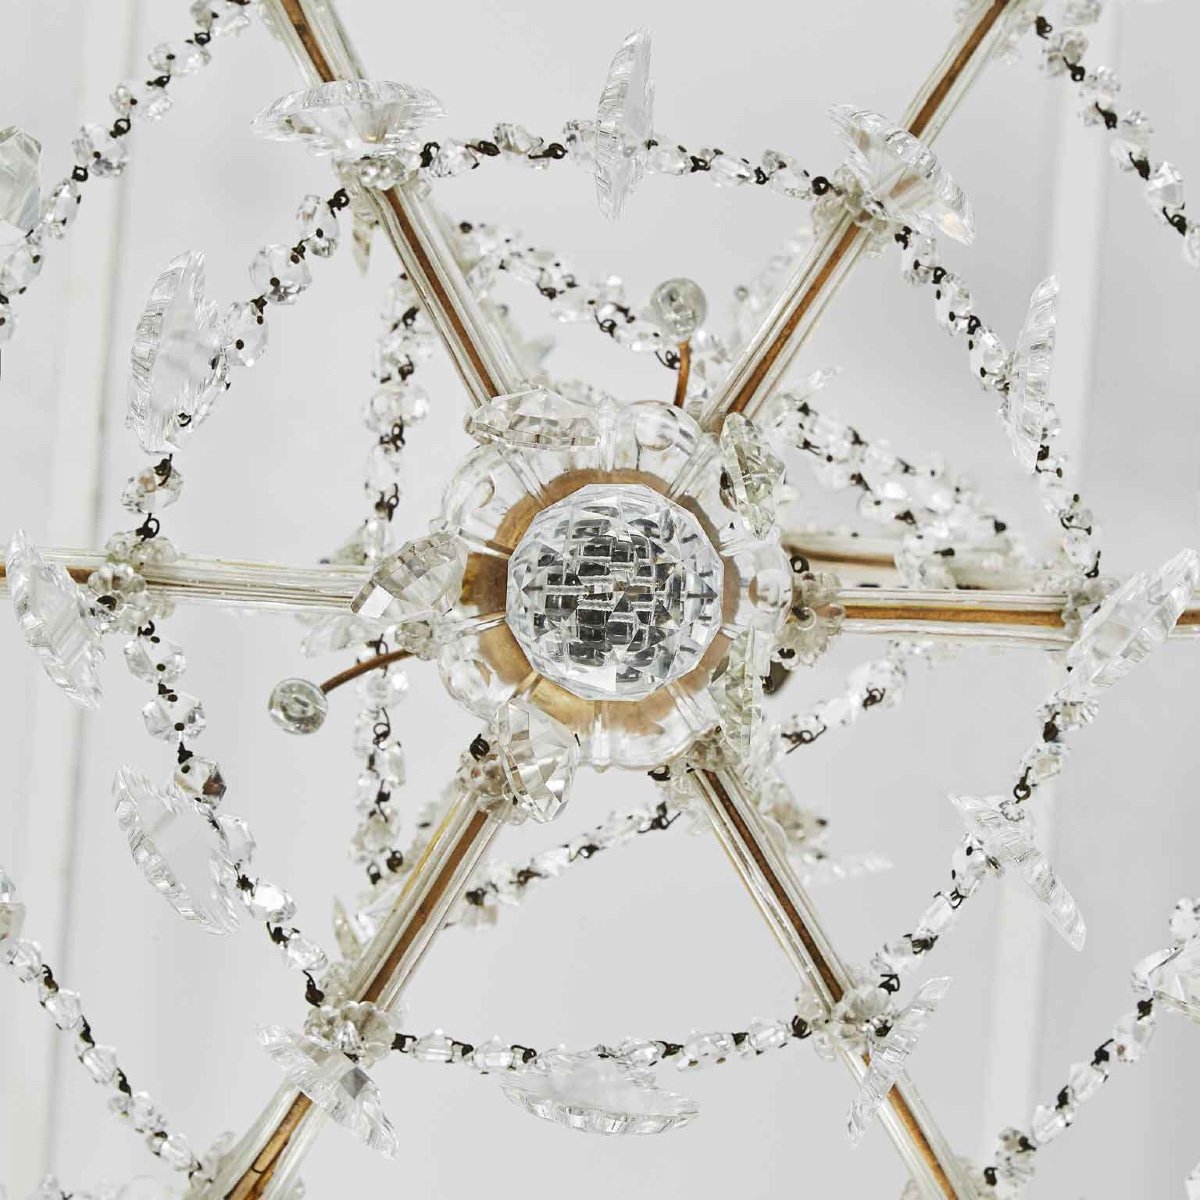 Marie Therese Crystal Chandelier Restored Half 20th-photo-3